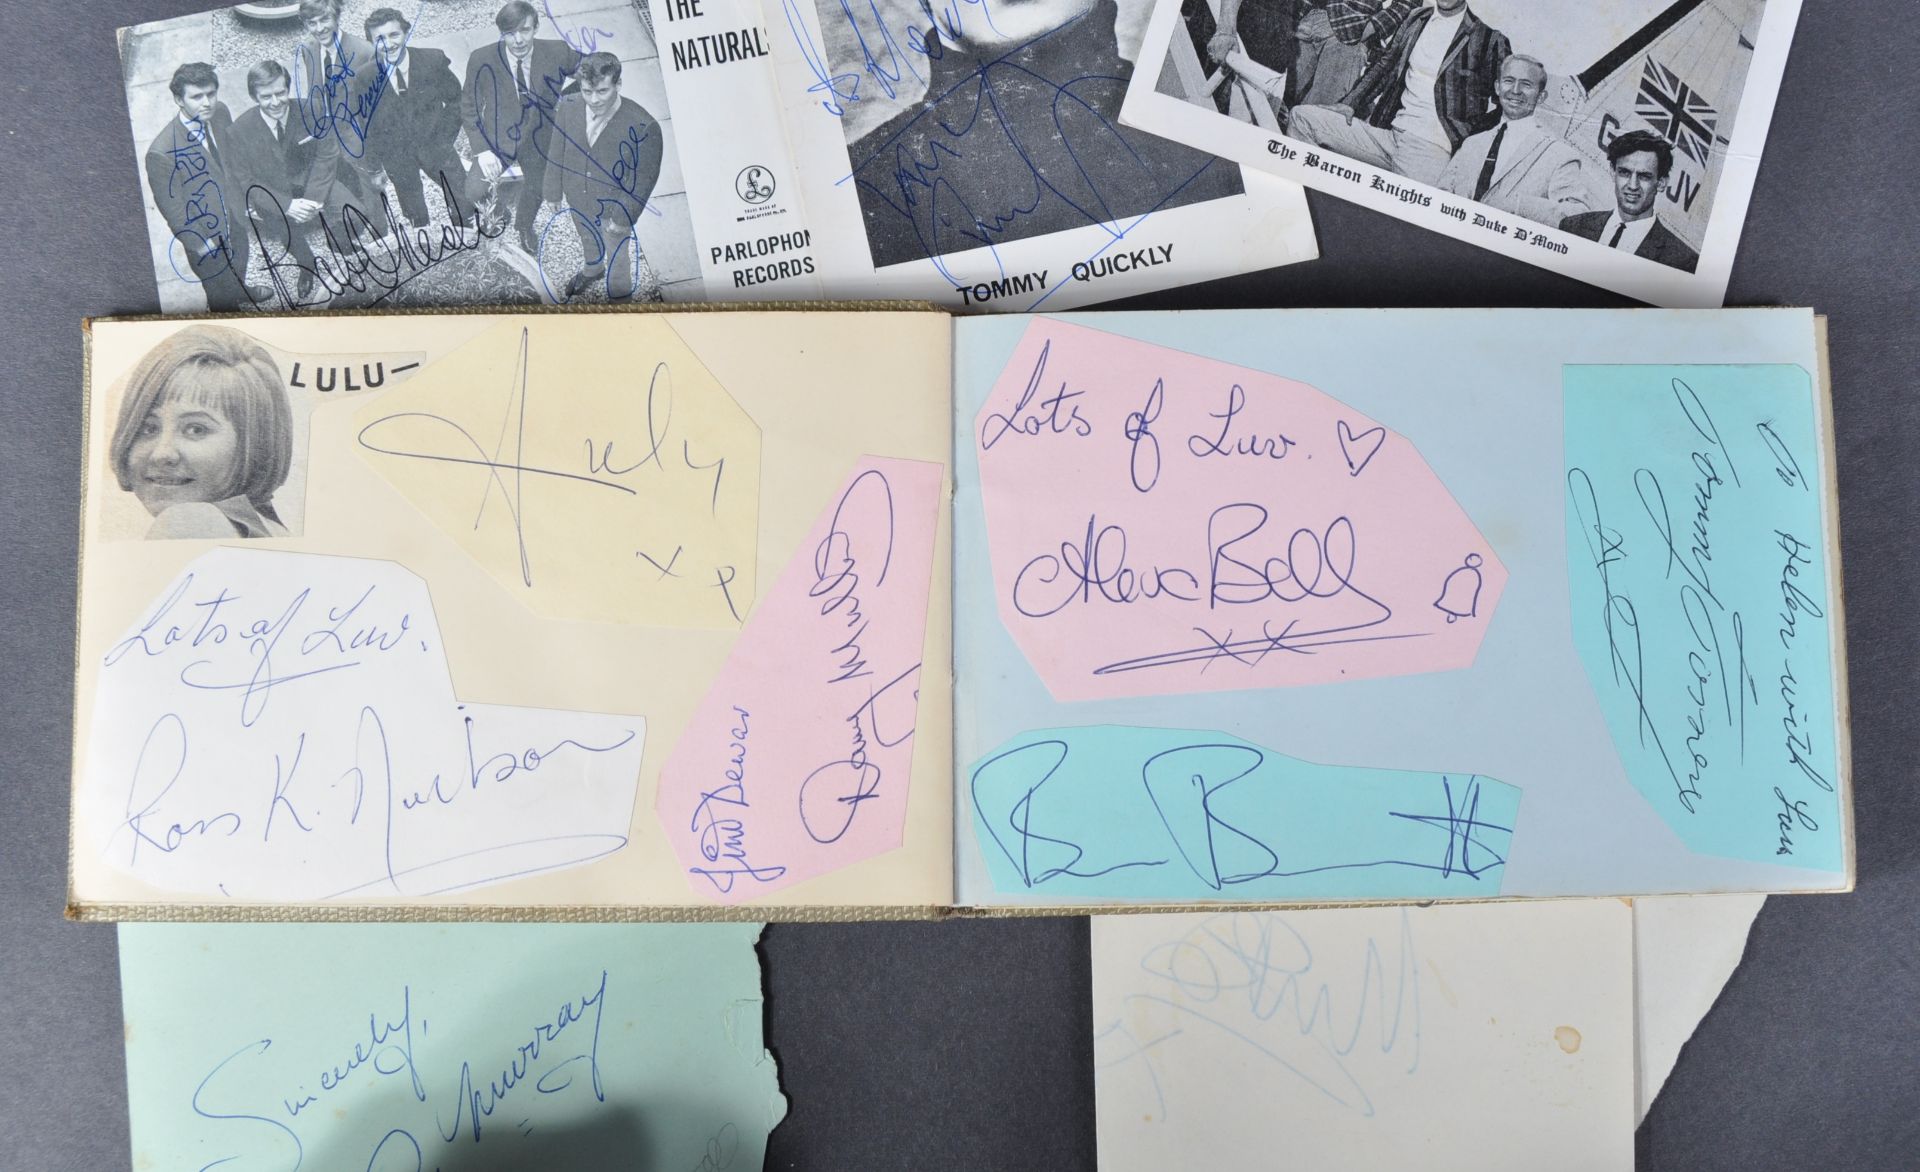 1960S MUSIC AUTOGRAPH ALBUMS - OBTAINED FROM DISCS-A-GOGO - Image 25 of 31